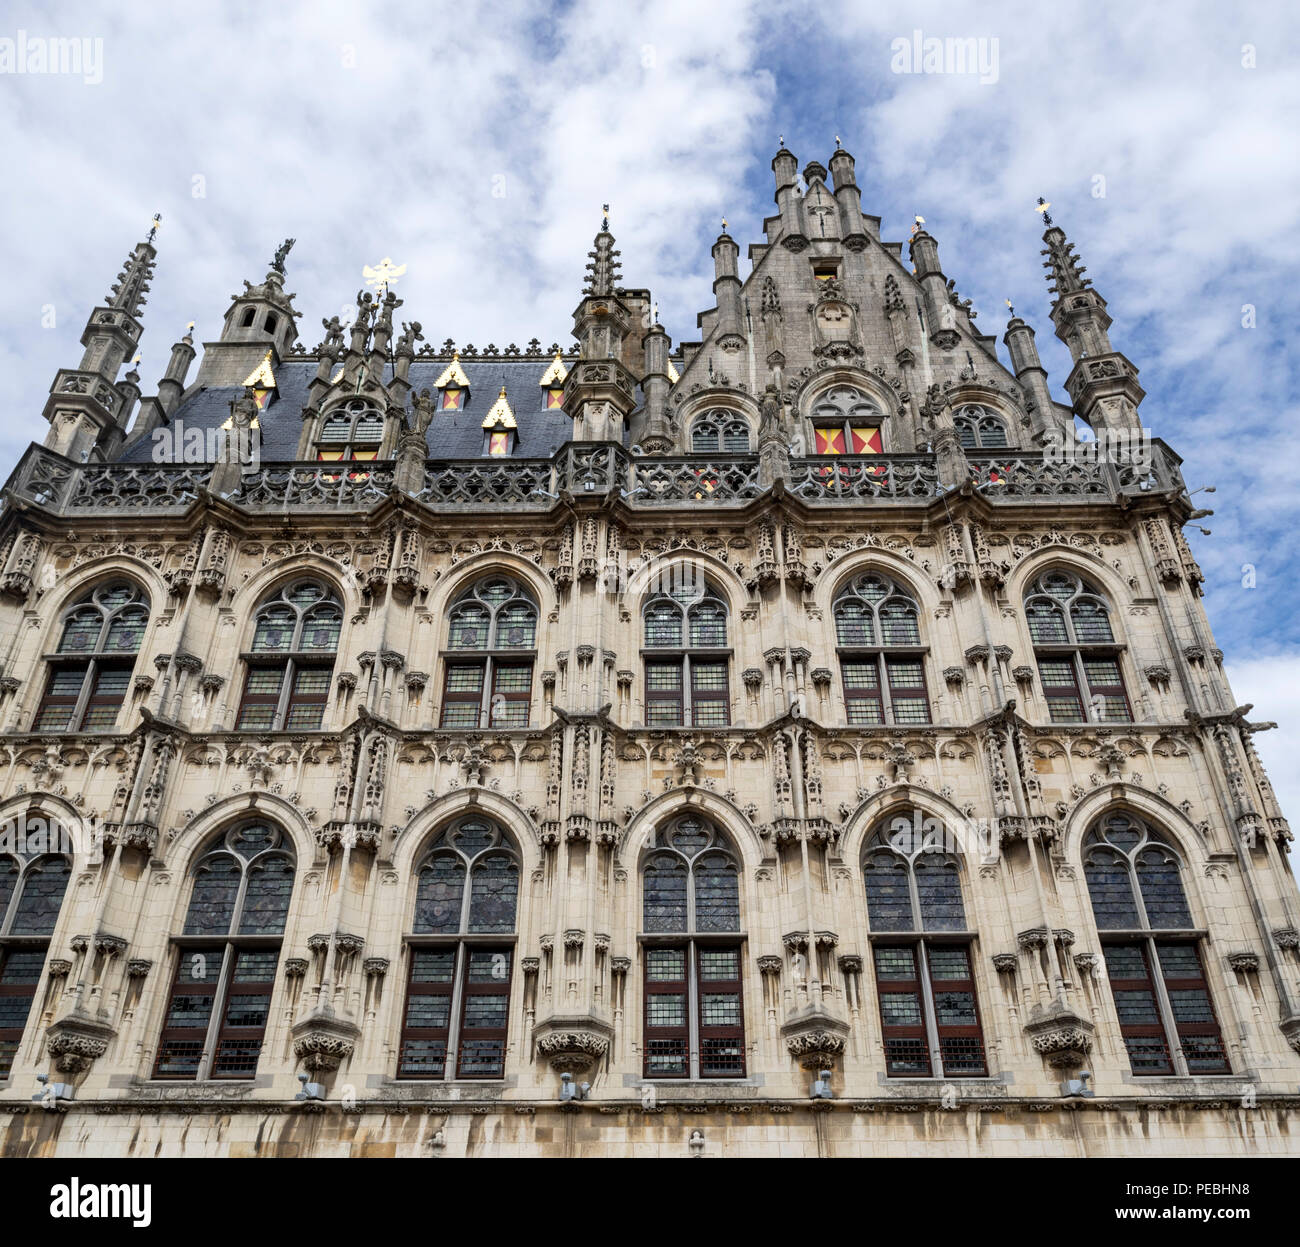 16th century town hall / city hall of Oudenaarde in Flamboyant Gothic style, East Flanders, Belgium Stock Photo